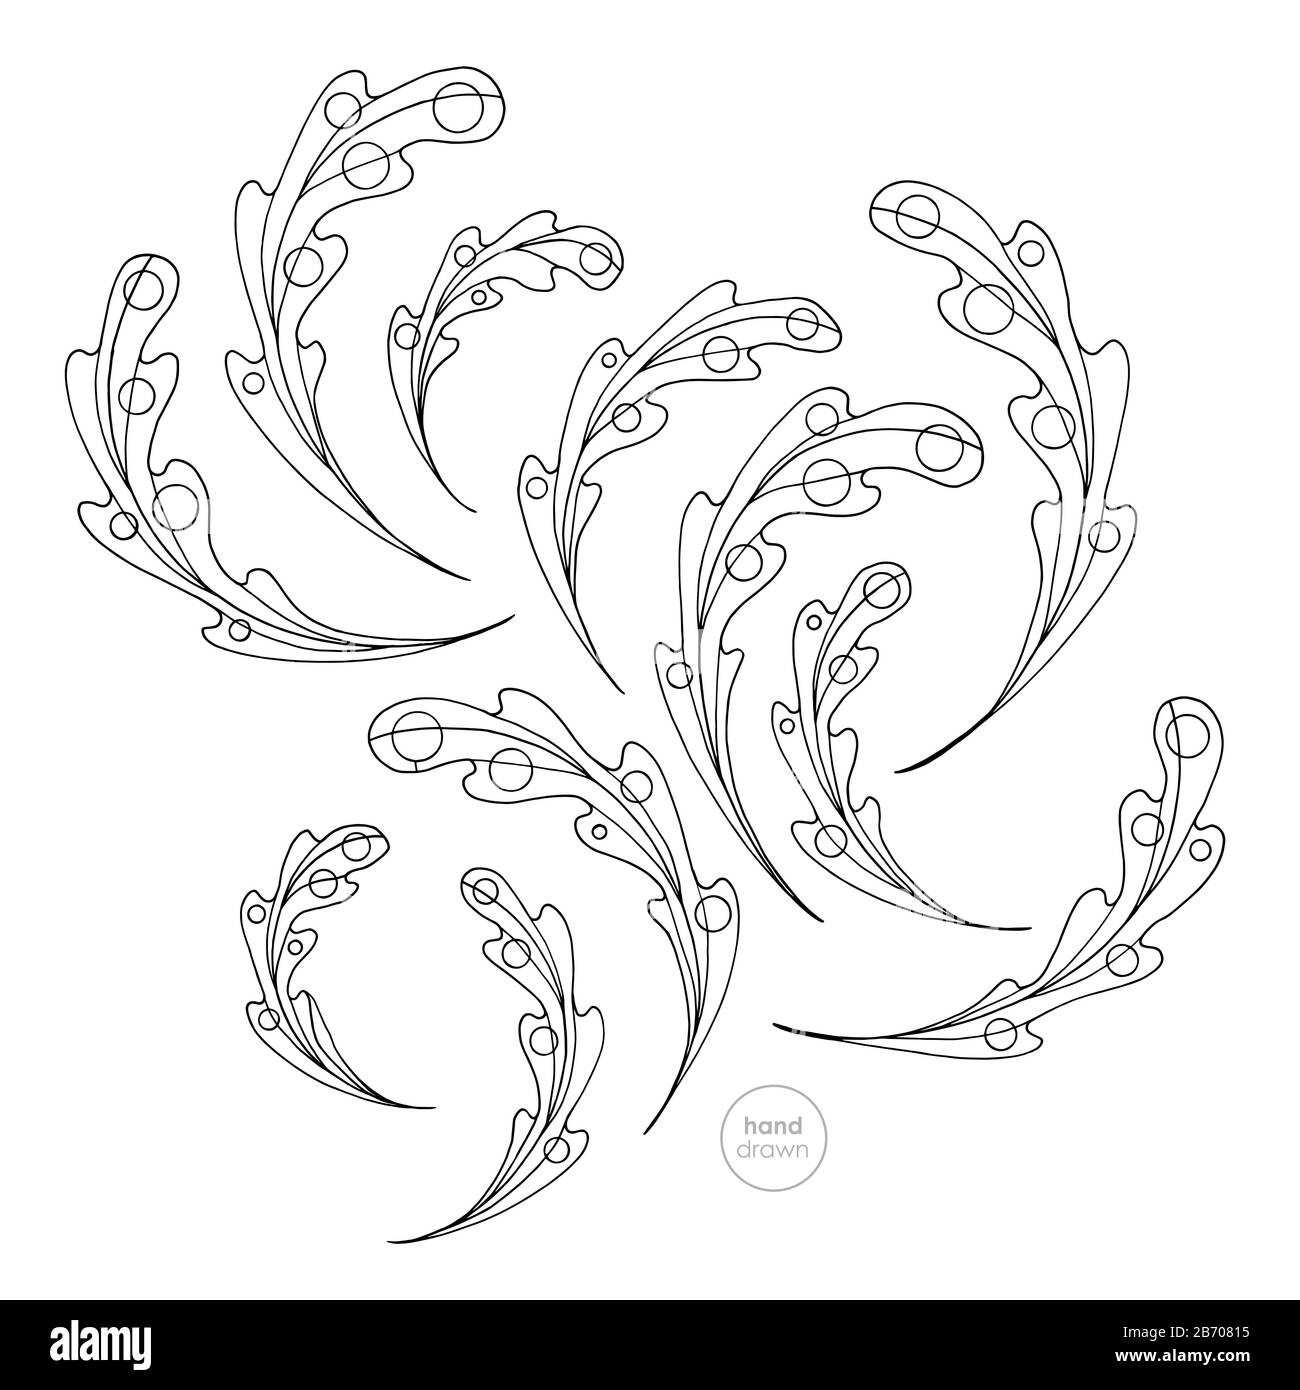 Oak leaves coloring book. Hand drawn abstract leaf vector illustration. Stock Vector